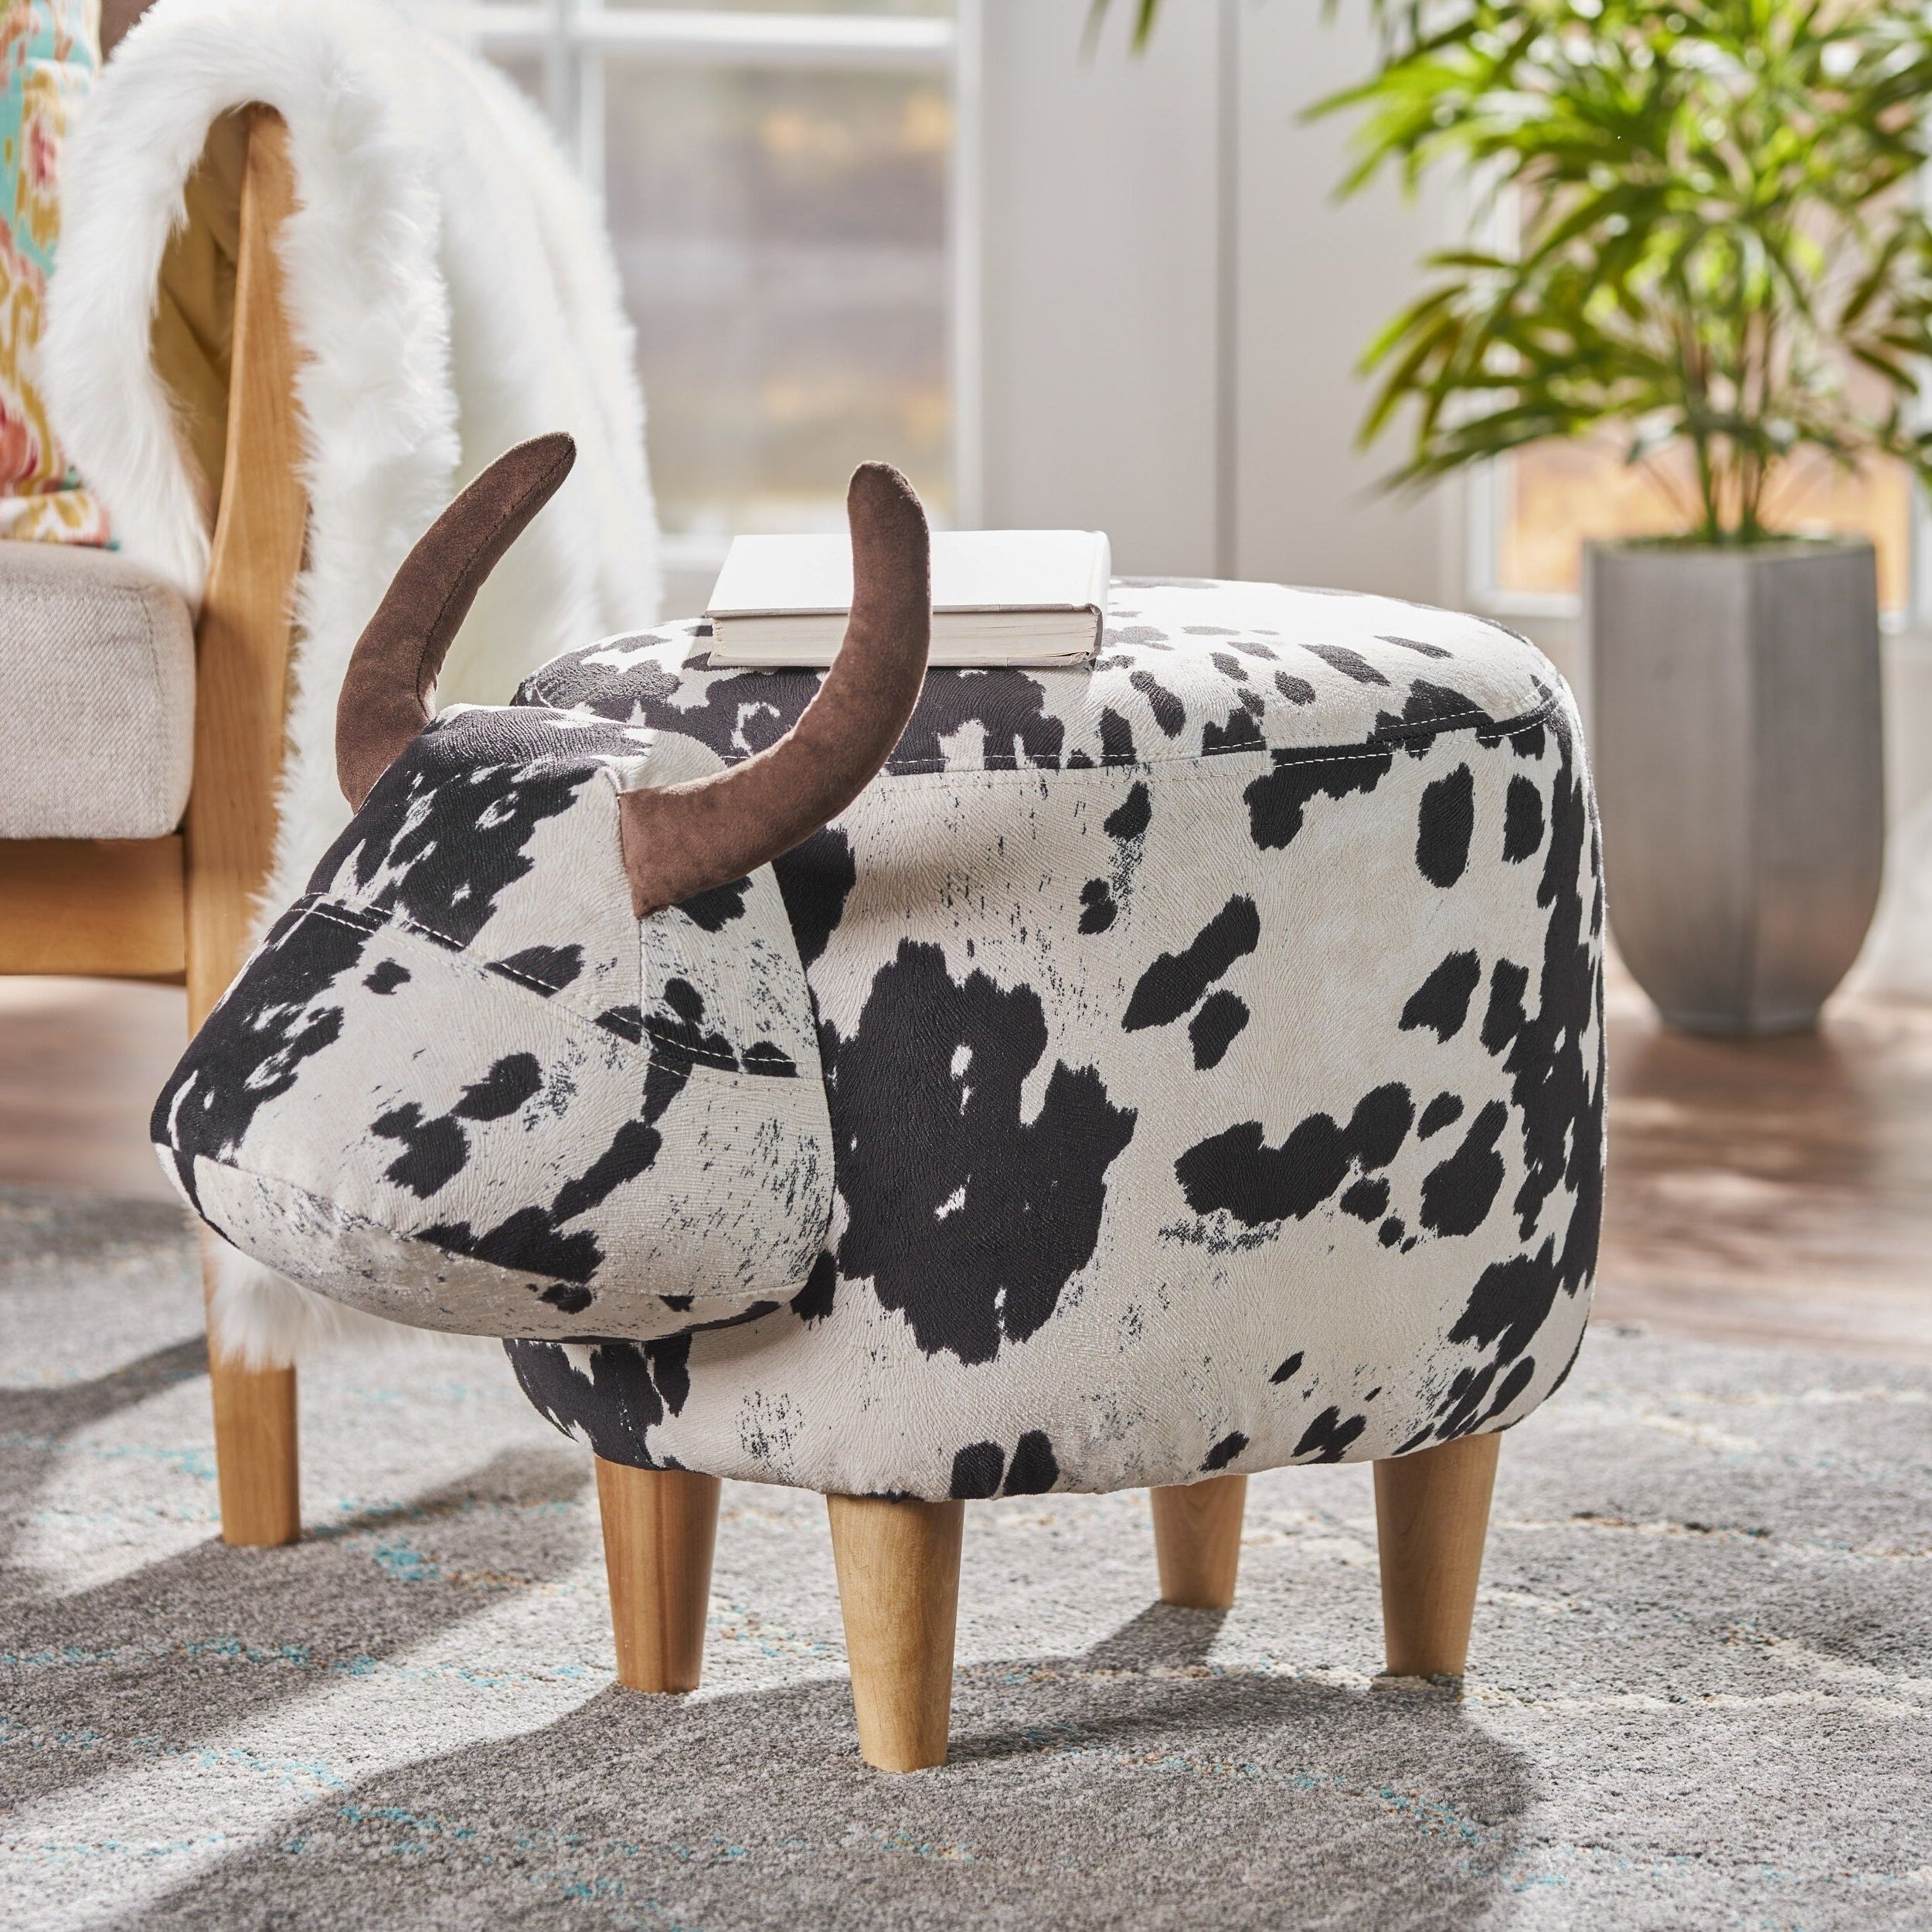 Most Current Warm Brown Cowhide Pouf Ottomans Inside Bessie Fabric Cow Patterned Ottomanchristopher Knight Home – White (View 3 of 10)